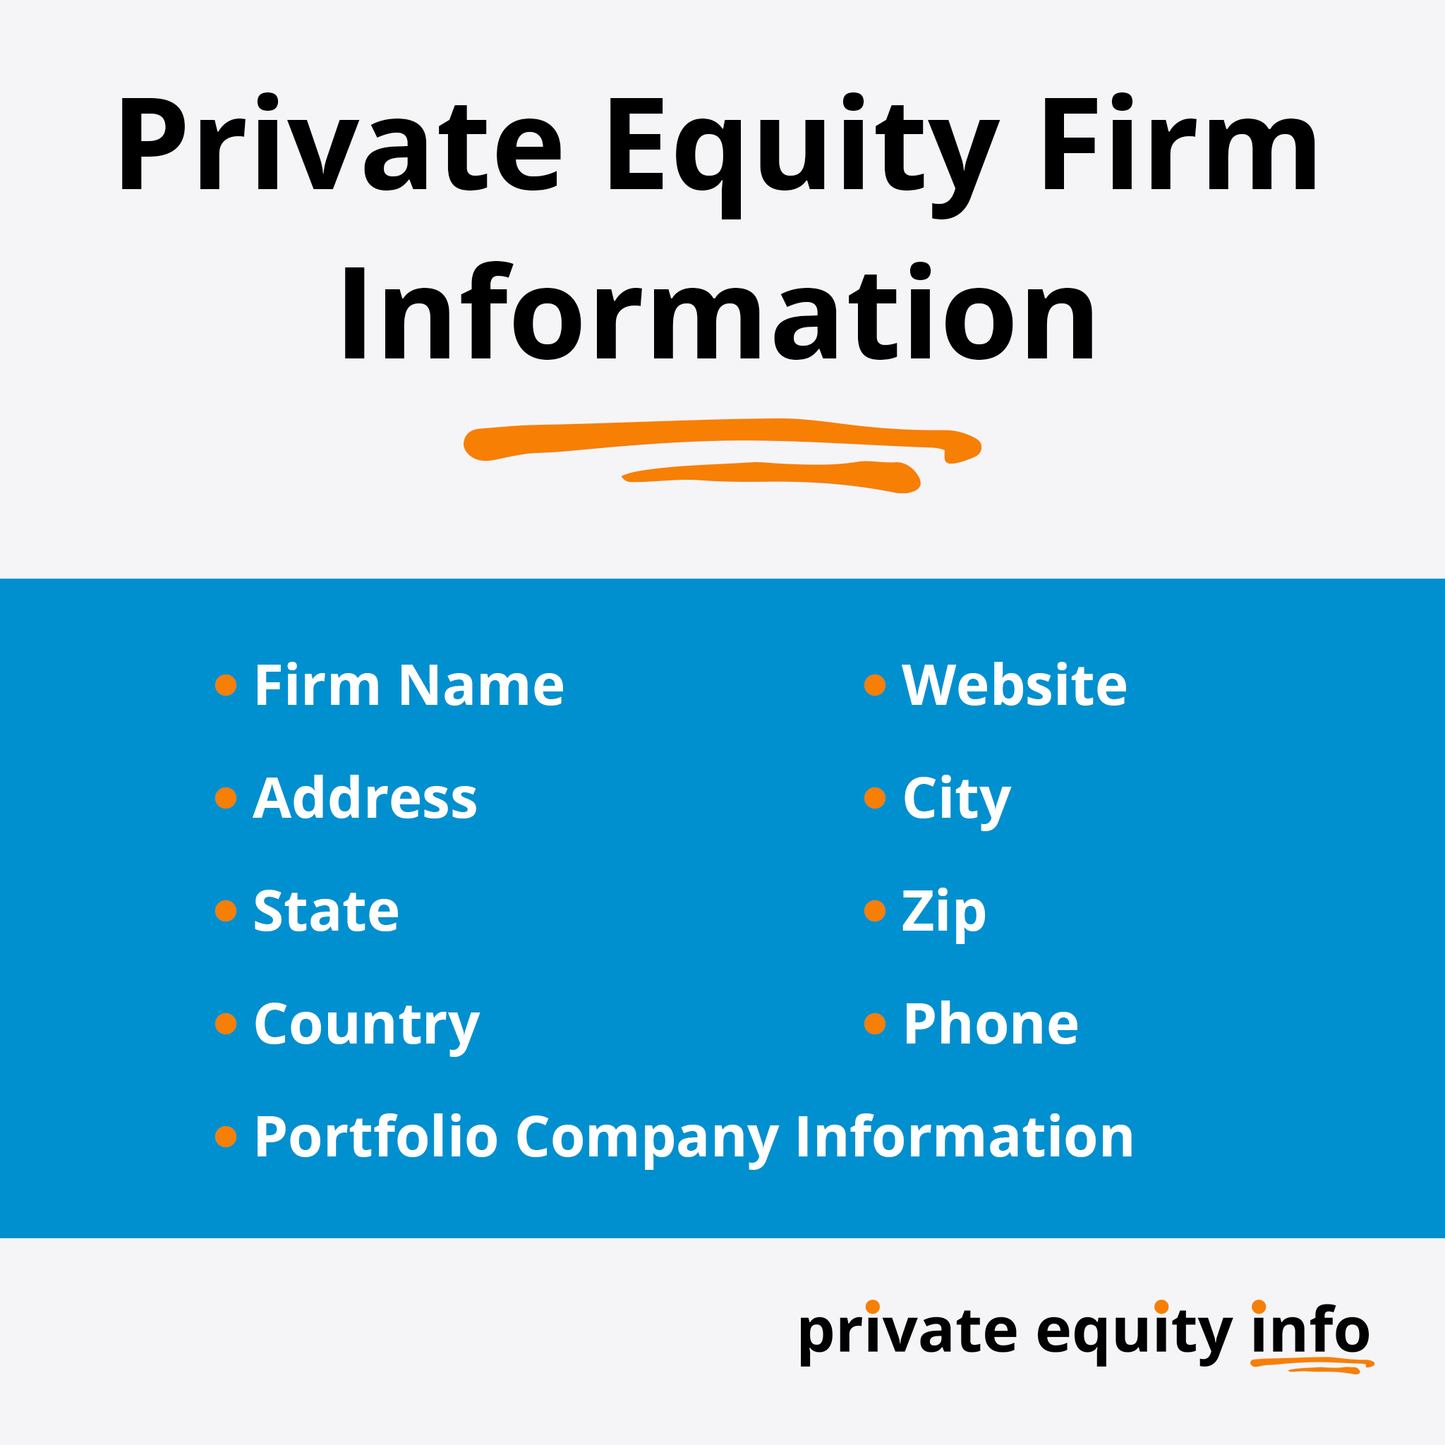 List of Private Equity Firms in the Digital Media Industry